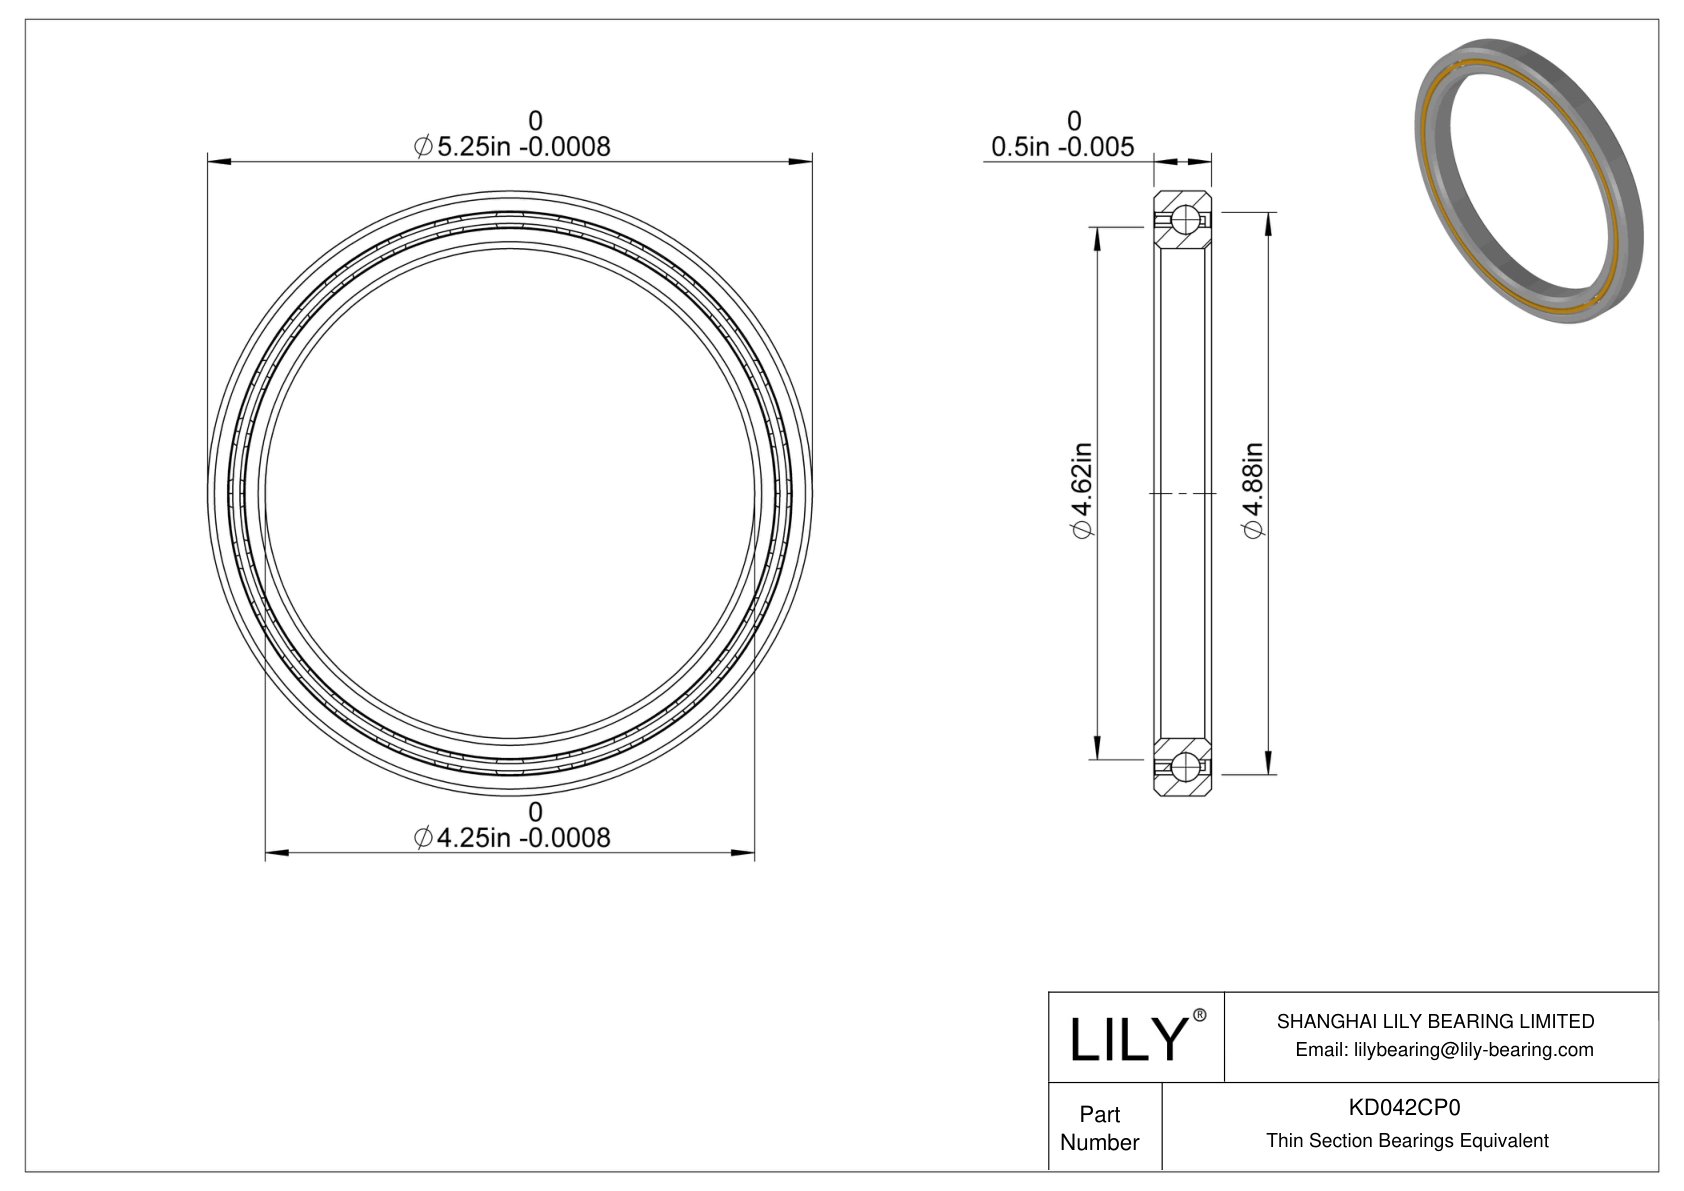 KD042CP0 Constant Section (CS) Bearings cad drawing